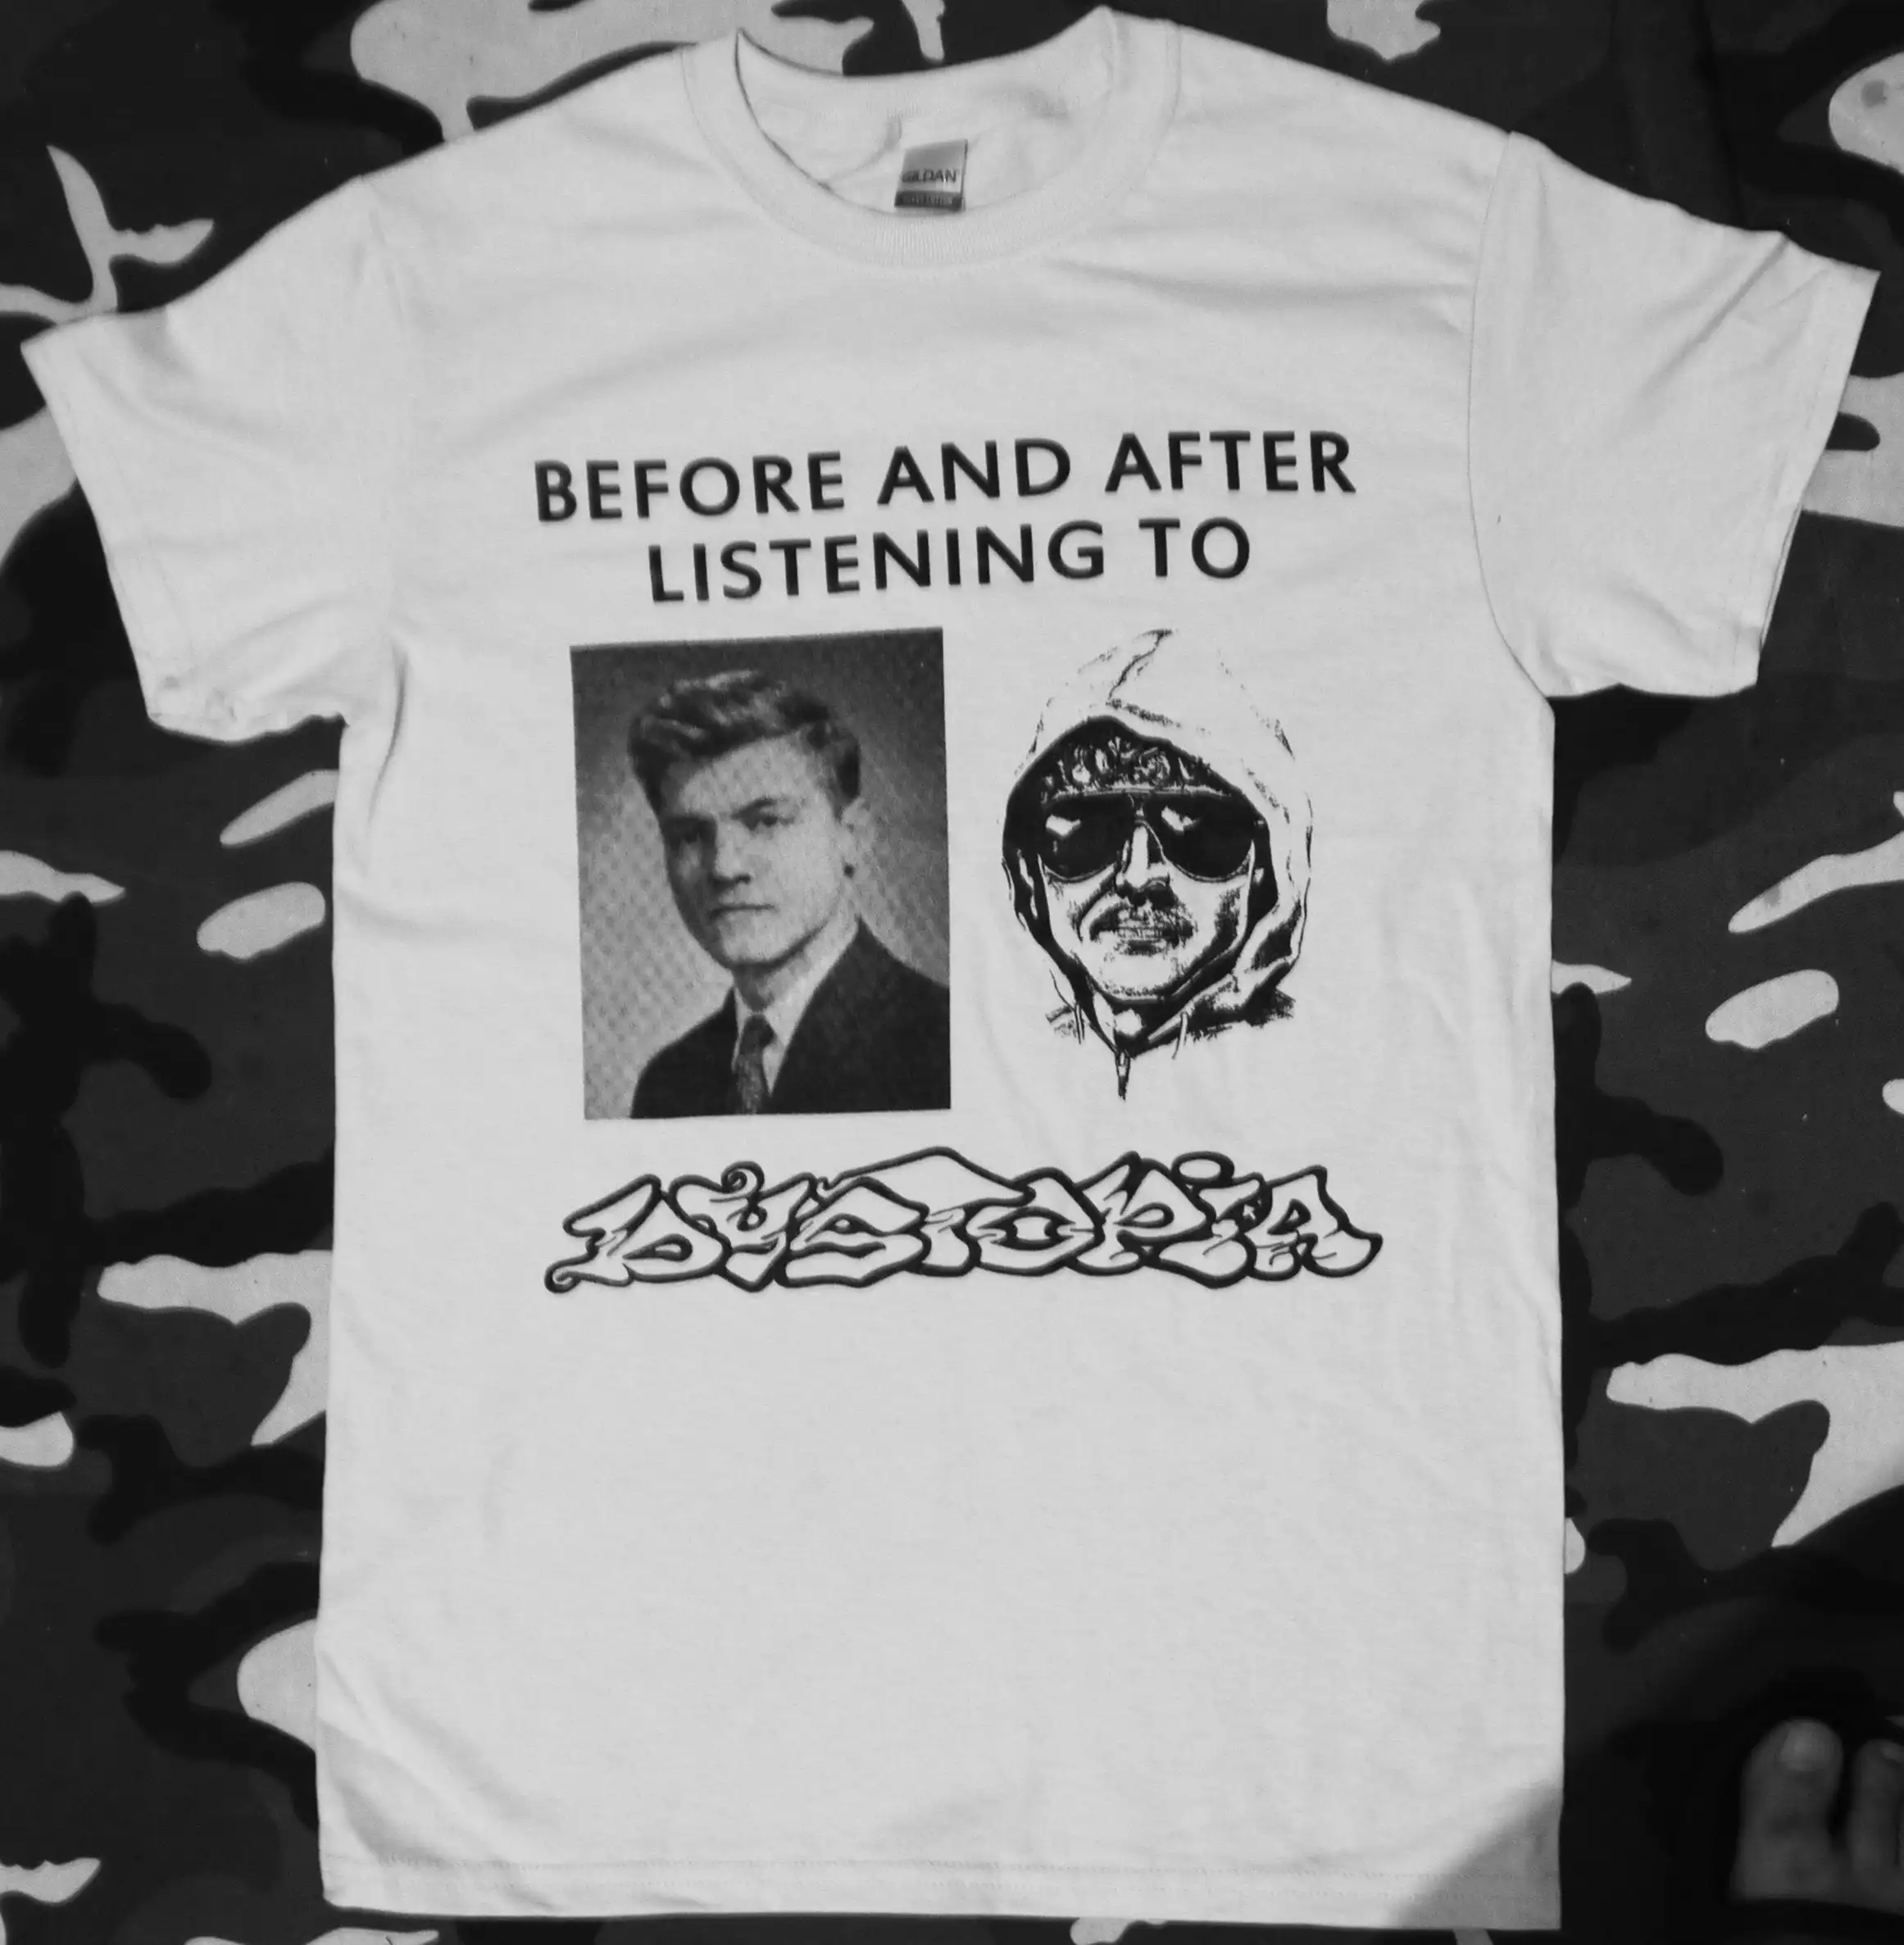 https://ae01.alicdn.com/kf/Sf120e0bebc9447d3a8e0ea8e555f9aaeu/Before-and-After-Listening-to-DYSTOPIA-T-shirt.jpg